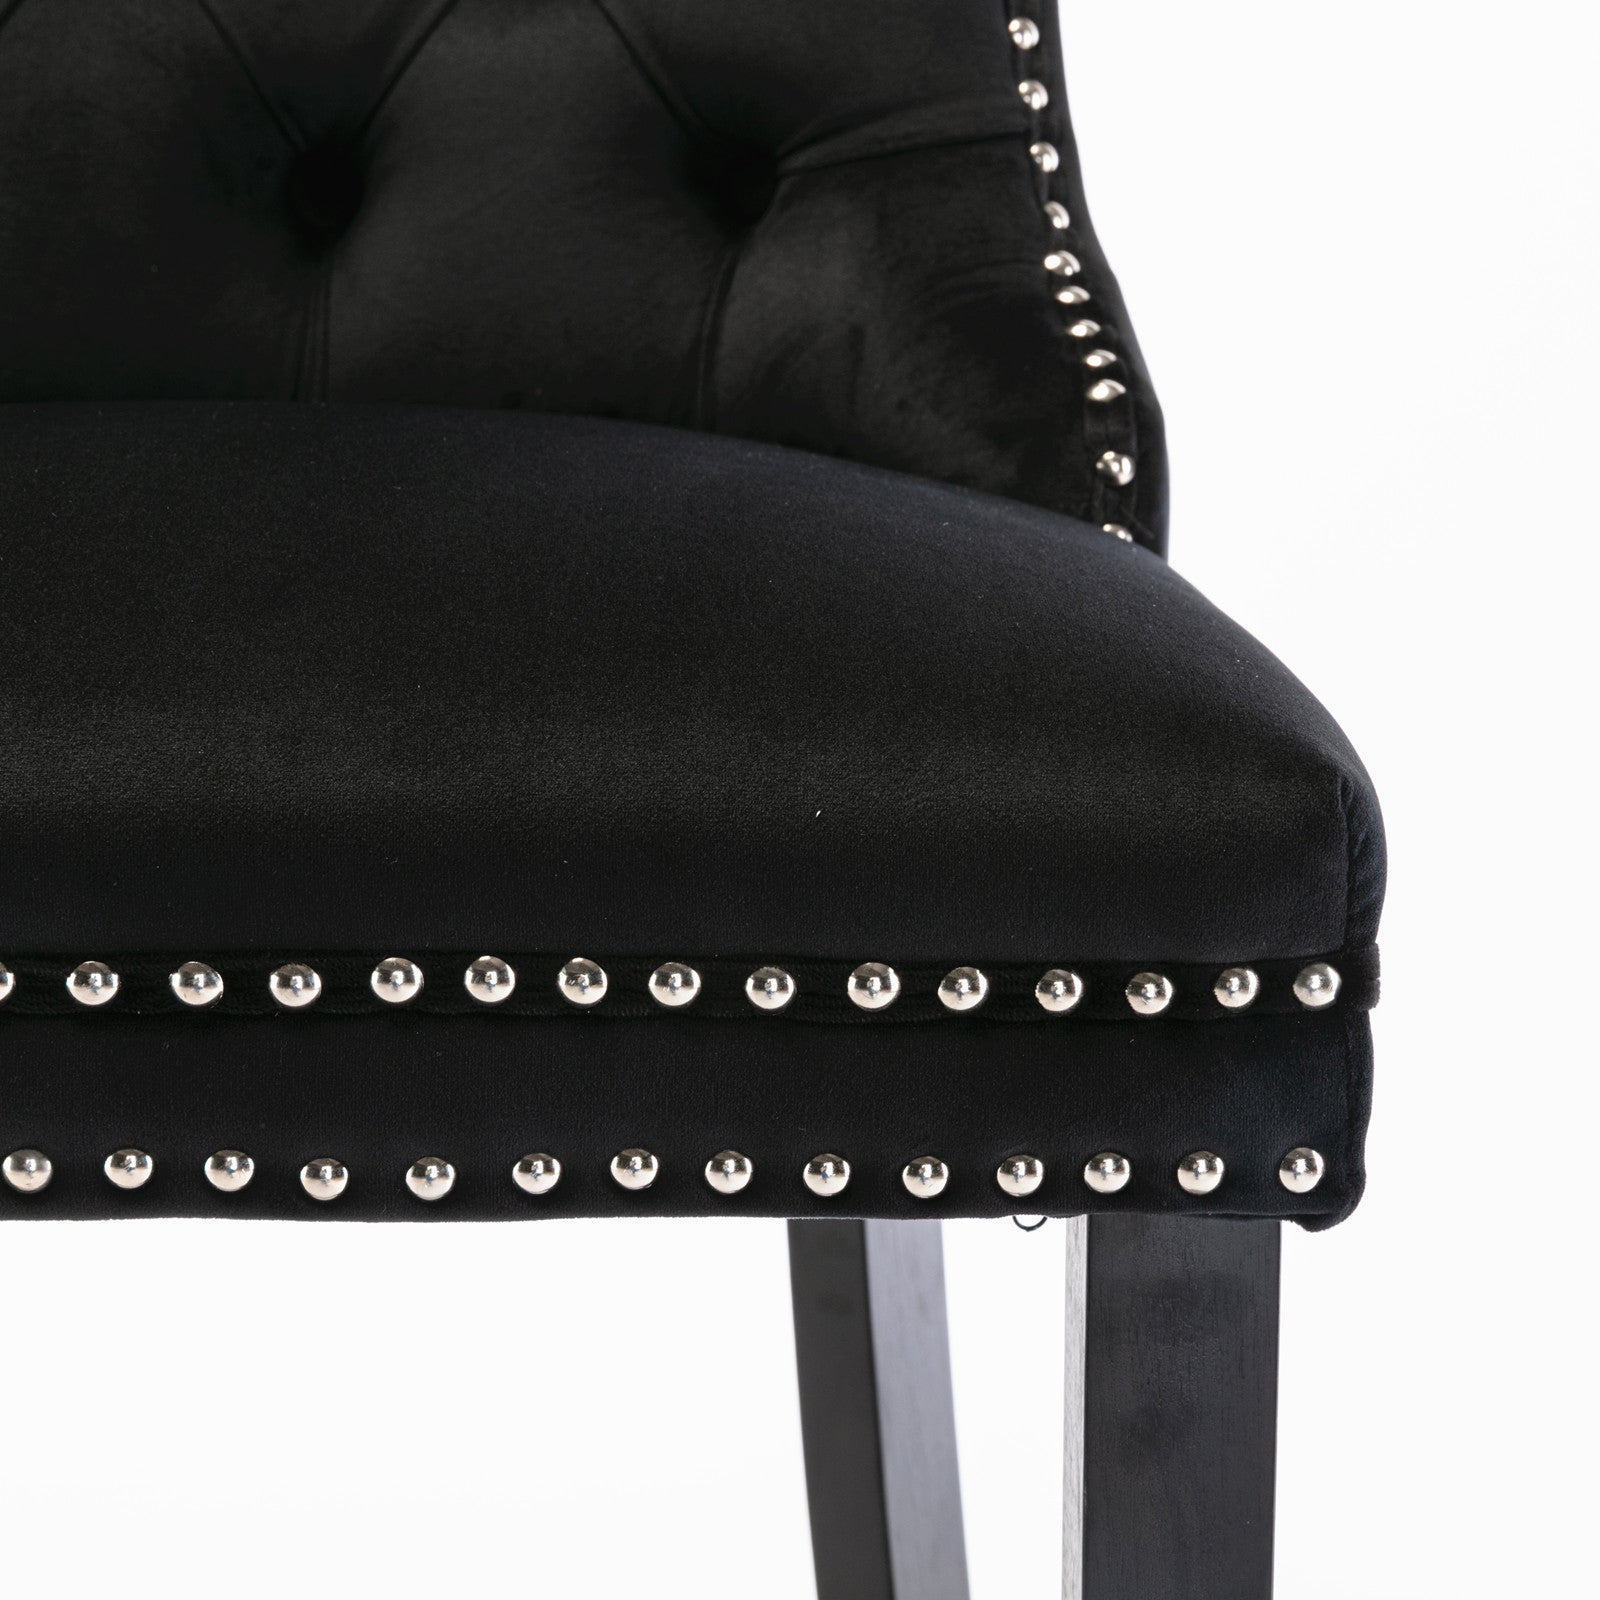 Set of 2 Black Velvet Counter Stools Tufted Back with Nailhead Trim and Ring Pull